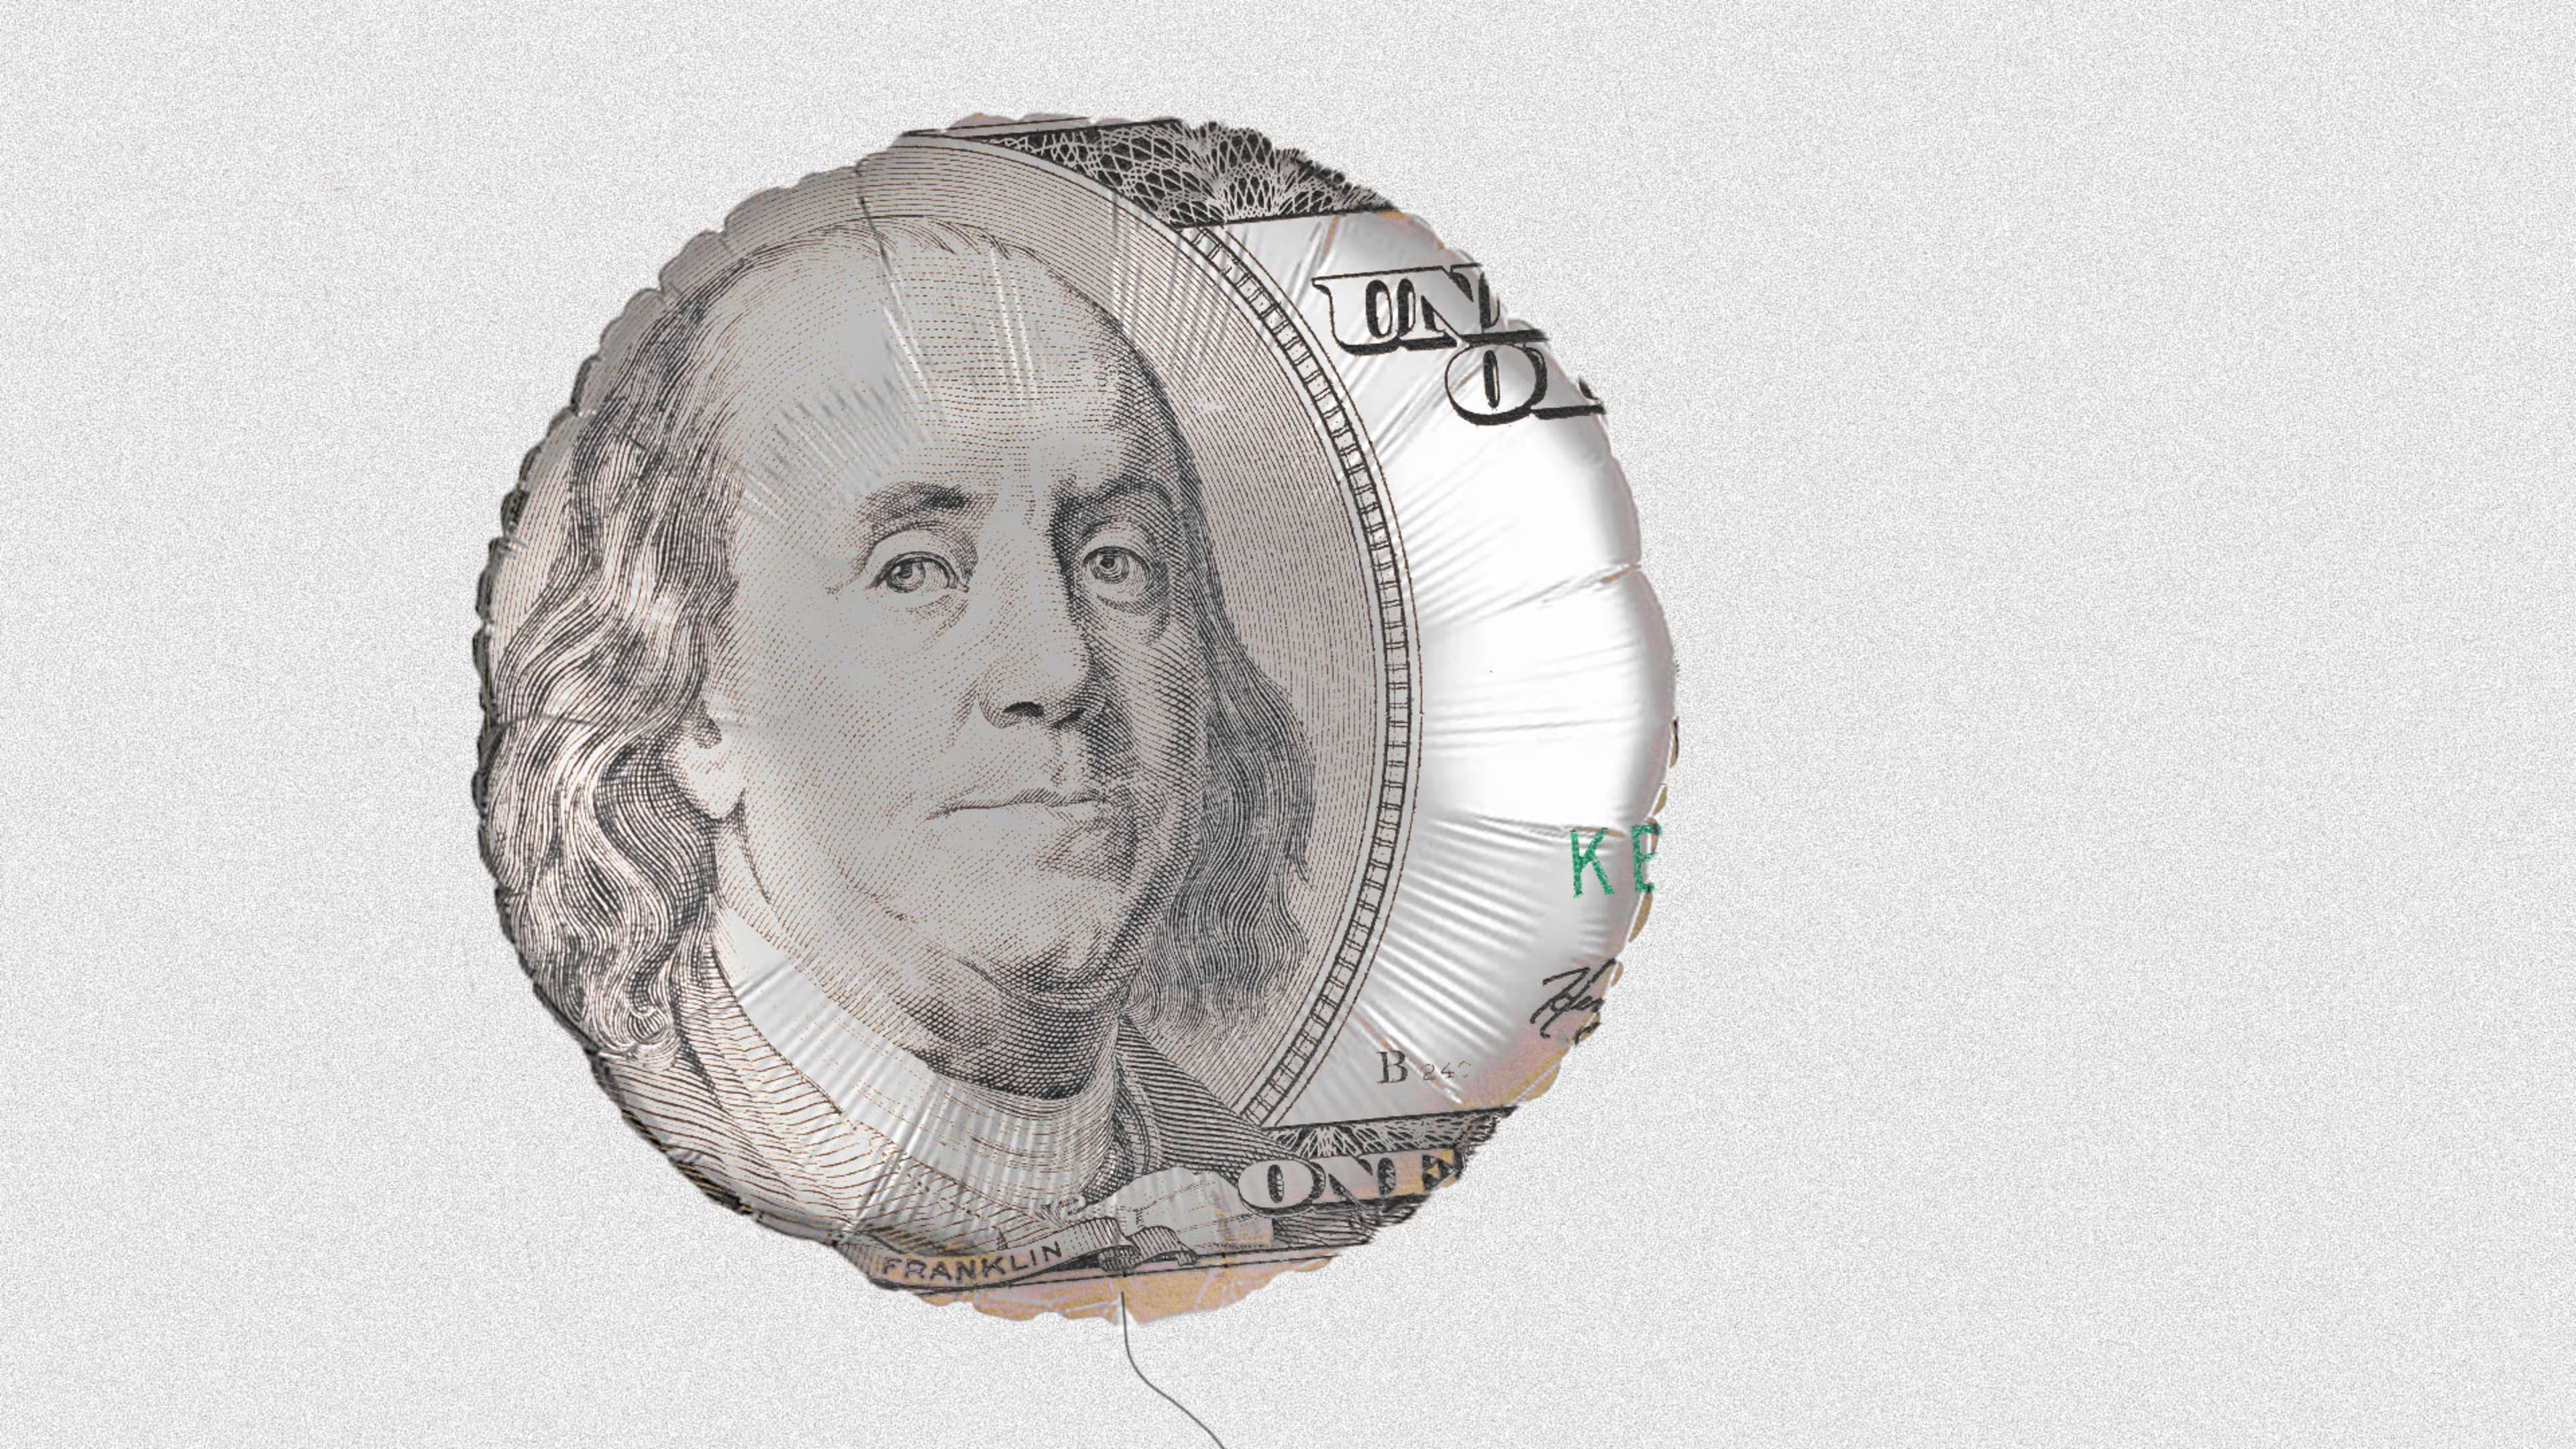 This depressing CPI inflation calculator reveals the diminishing buying power of your dollars